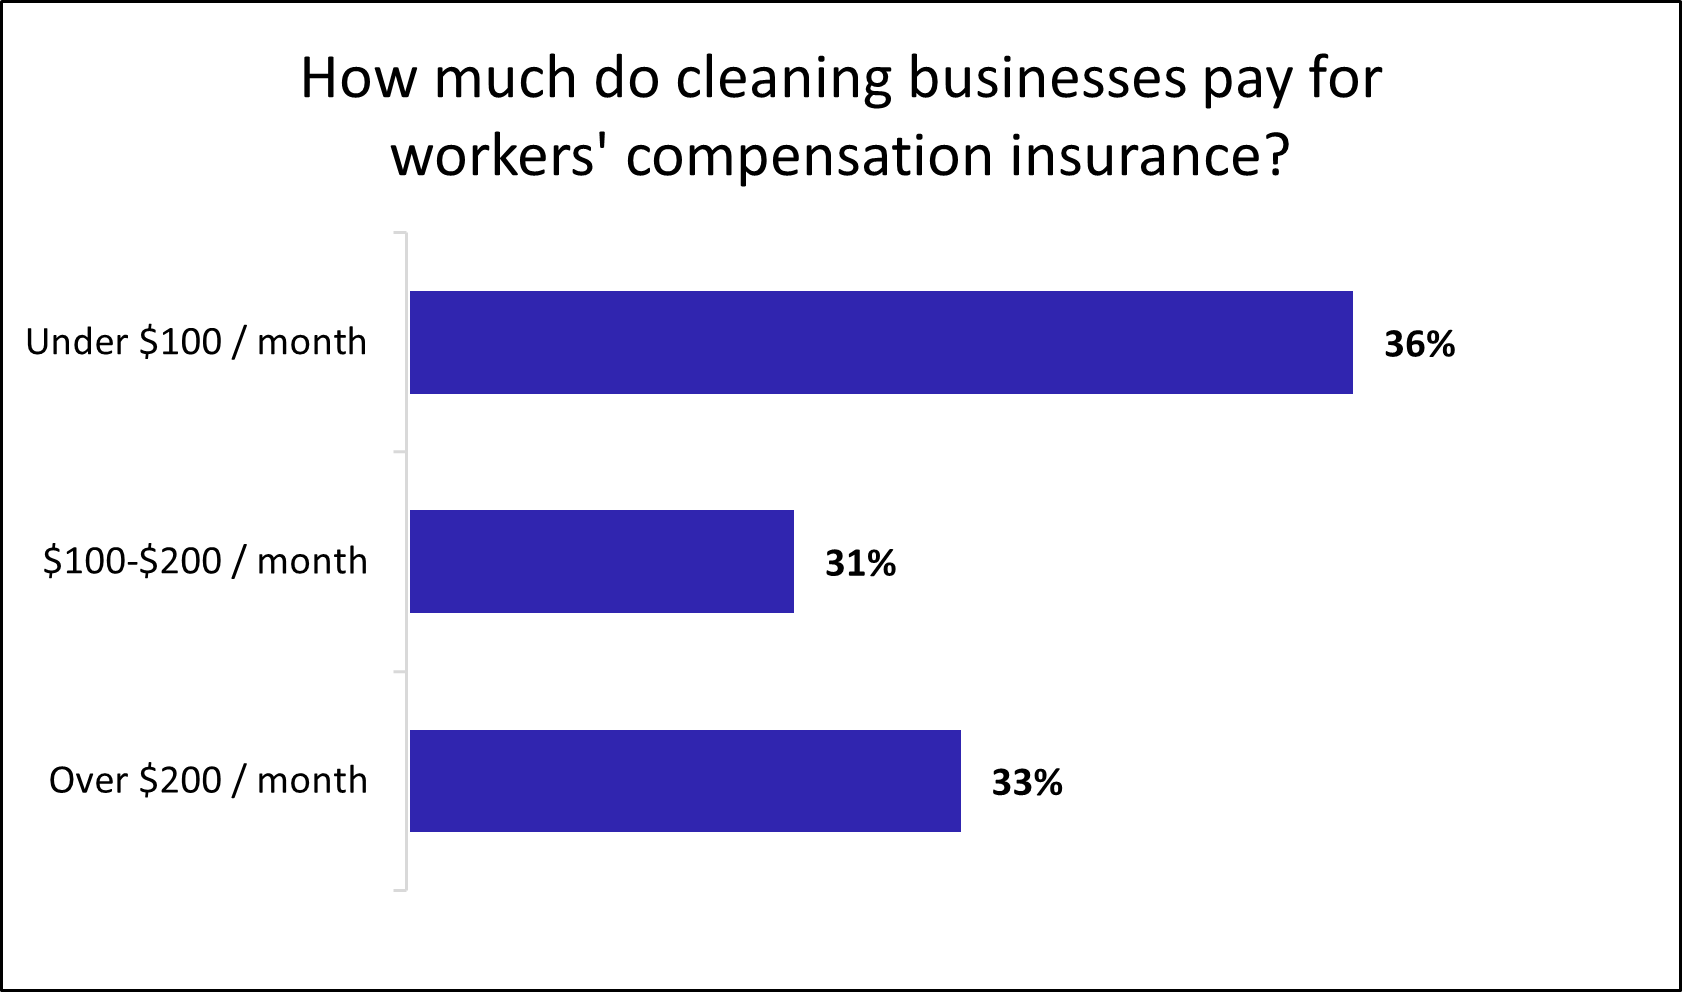 Average monthly cost of workers' compensation insurance for cleaning businesses.